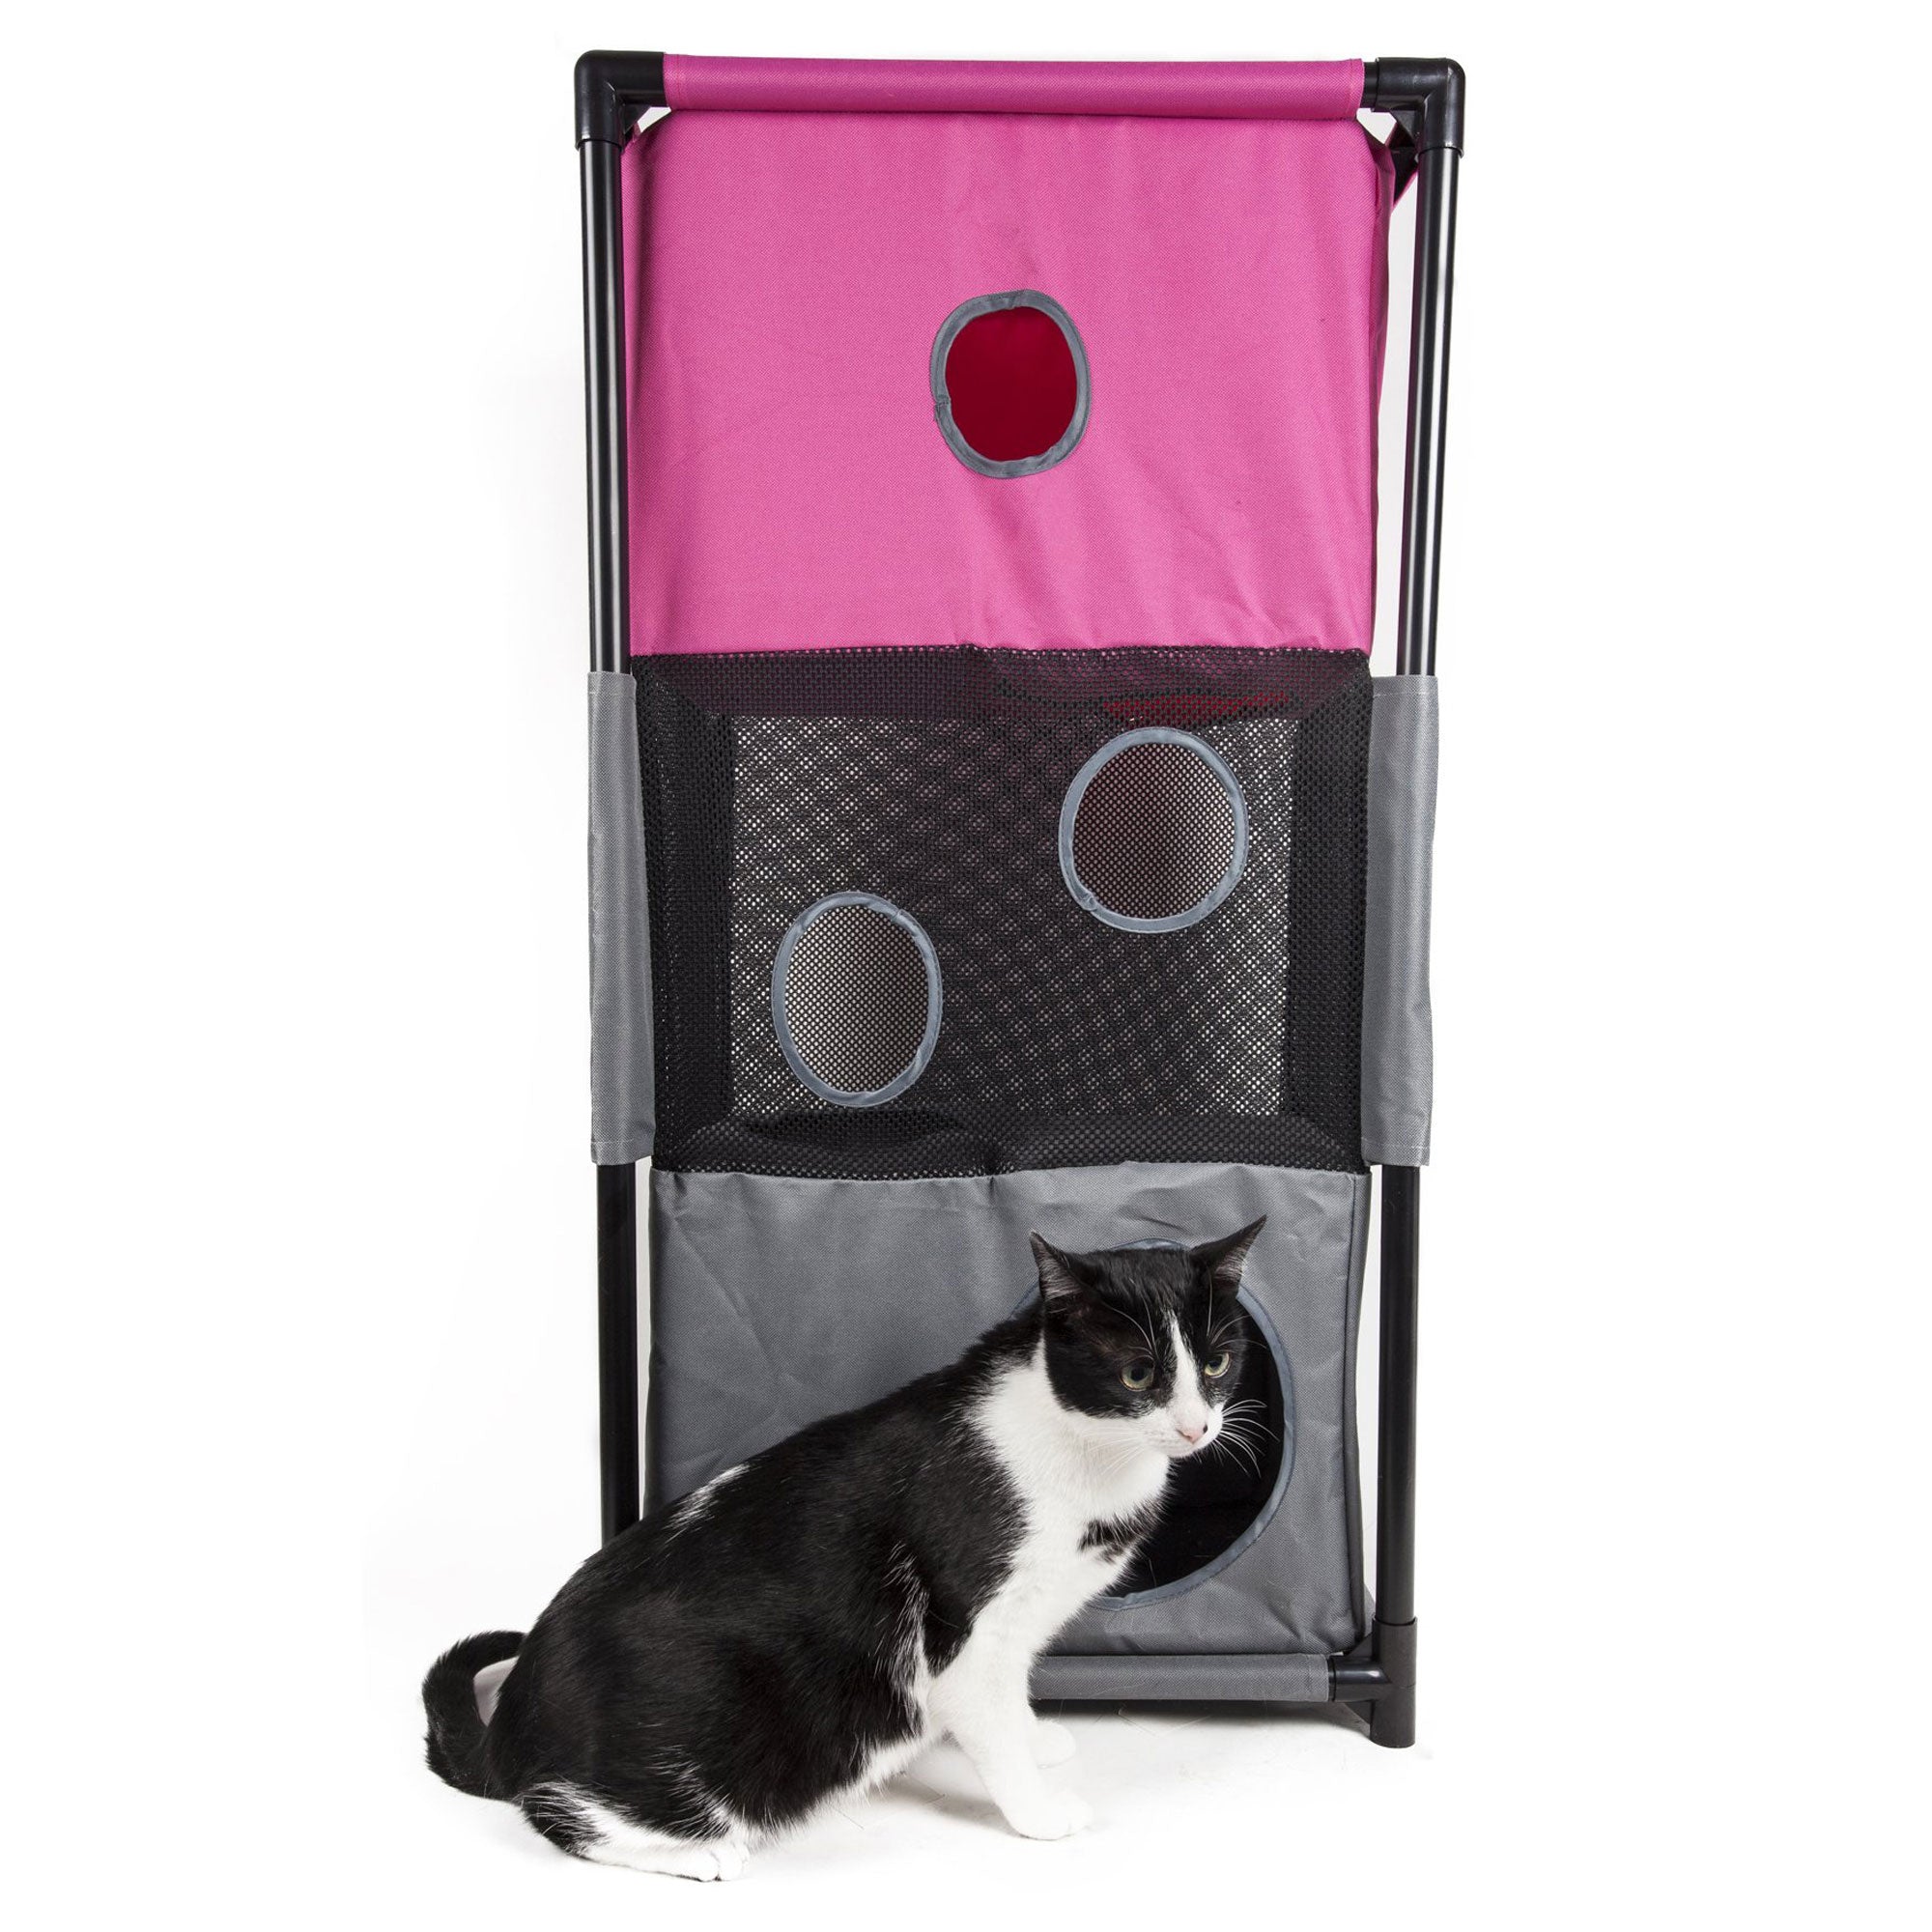 Pet Life Kitty-Square Cat House Furniture - Pink, Grey